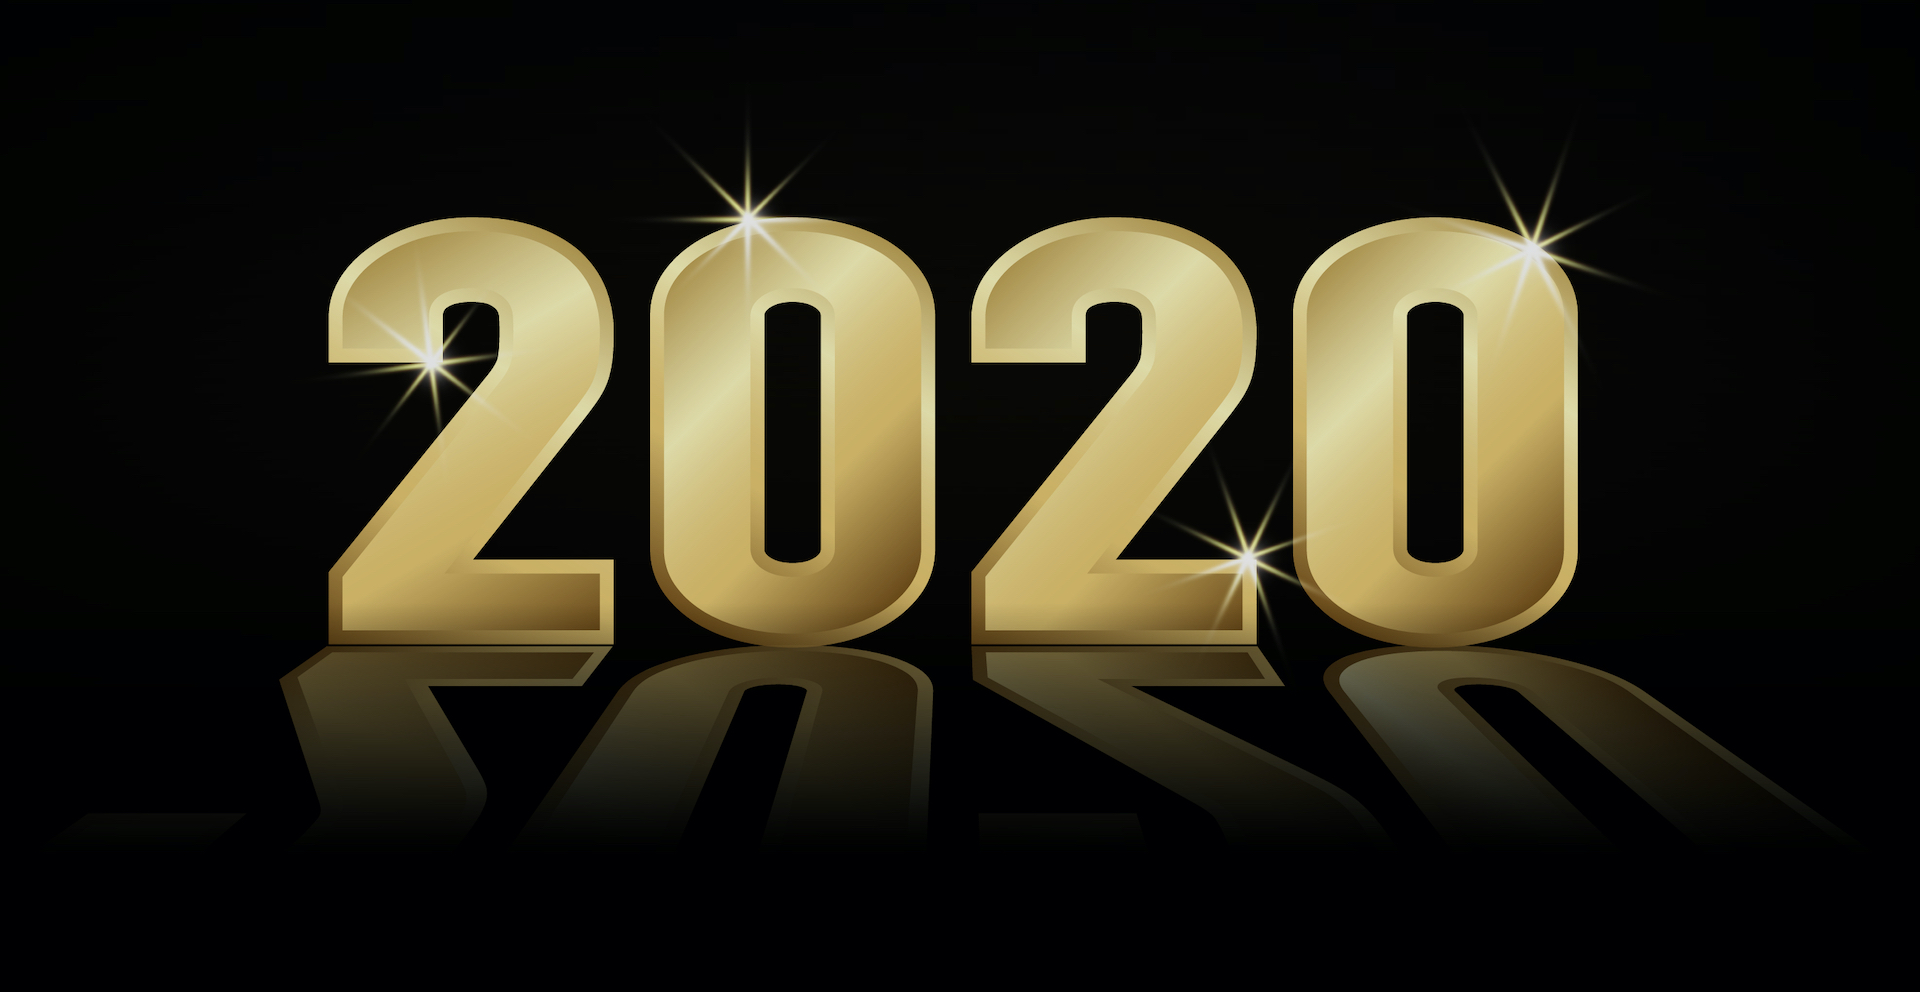 2020 gold. Perfect Plan time for a Miracle 2020.